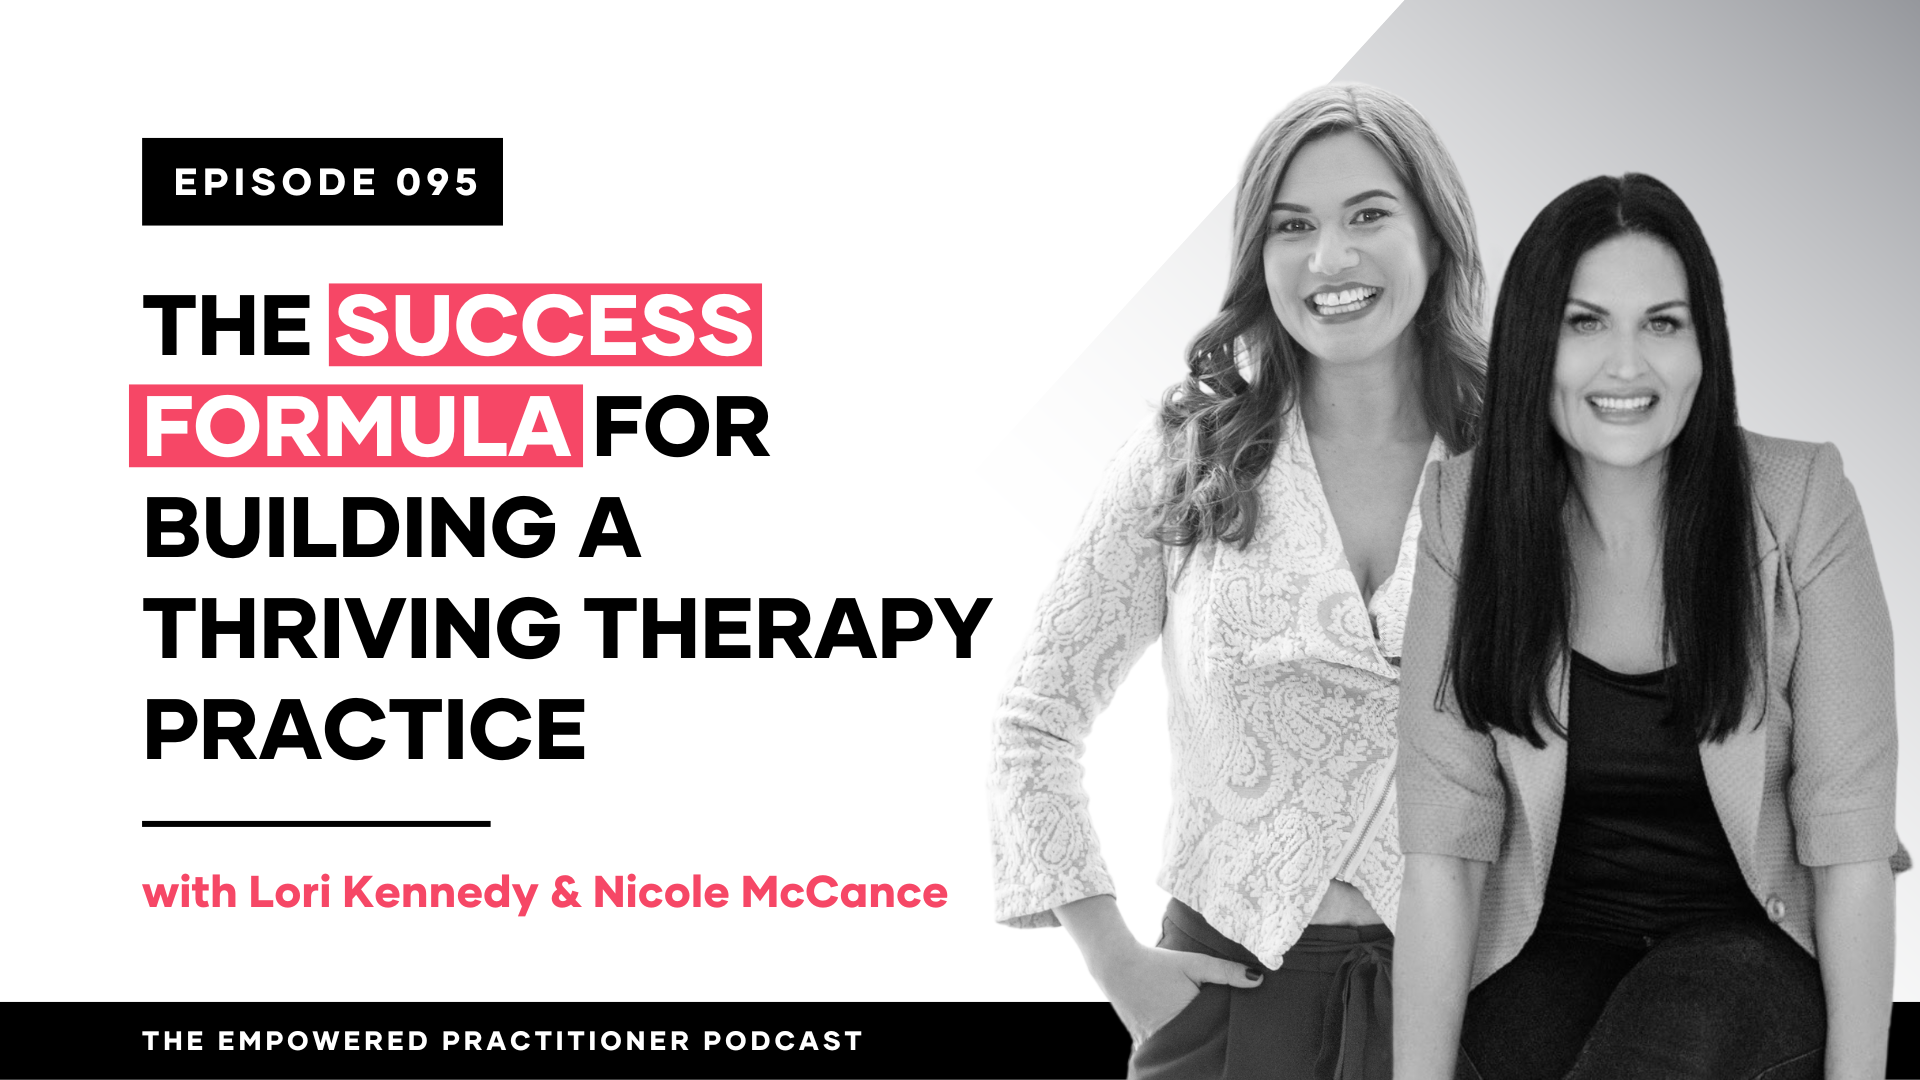 The Success Formula for Building a Thriving Therapy Practice